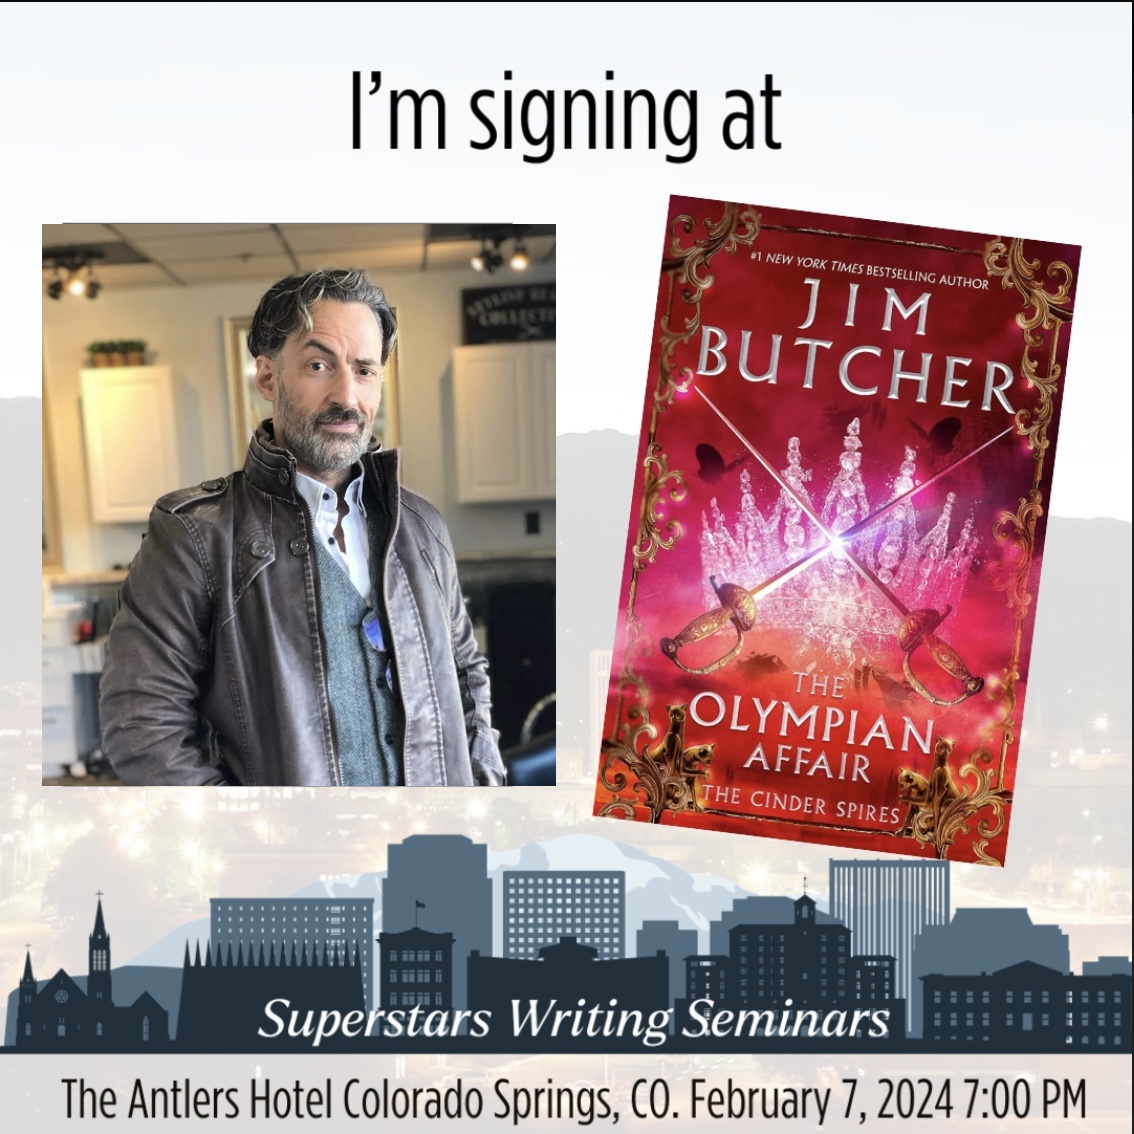 Jim will be at the Superstars Writing Seminar in Colorado Springs on February 7th! superstarswriting.com/bookstravaganz…